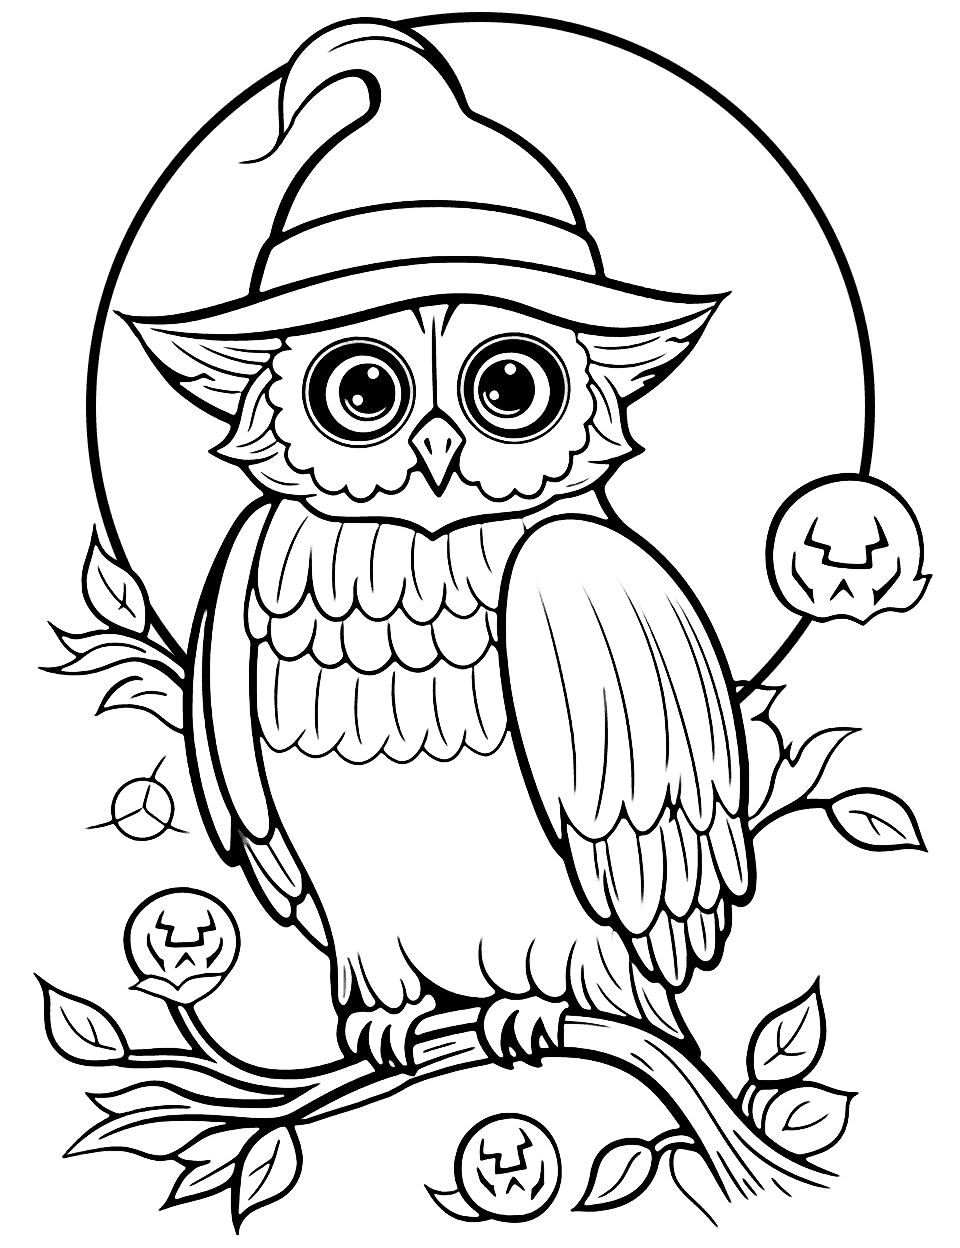 Halloween Owl Coloring Page - A detailed picture of an owl perched on a tree, with a spooky moon in the background.